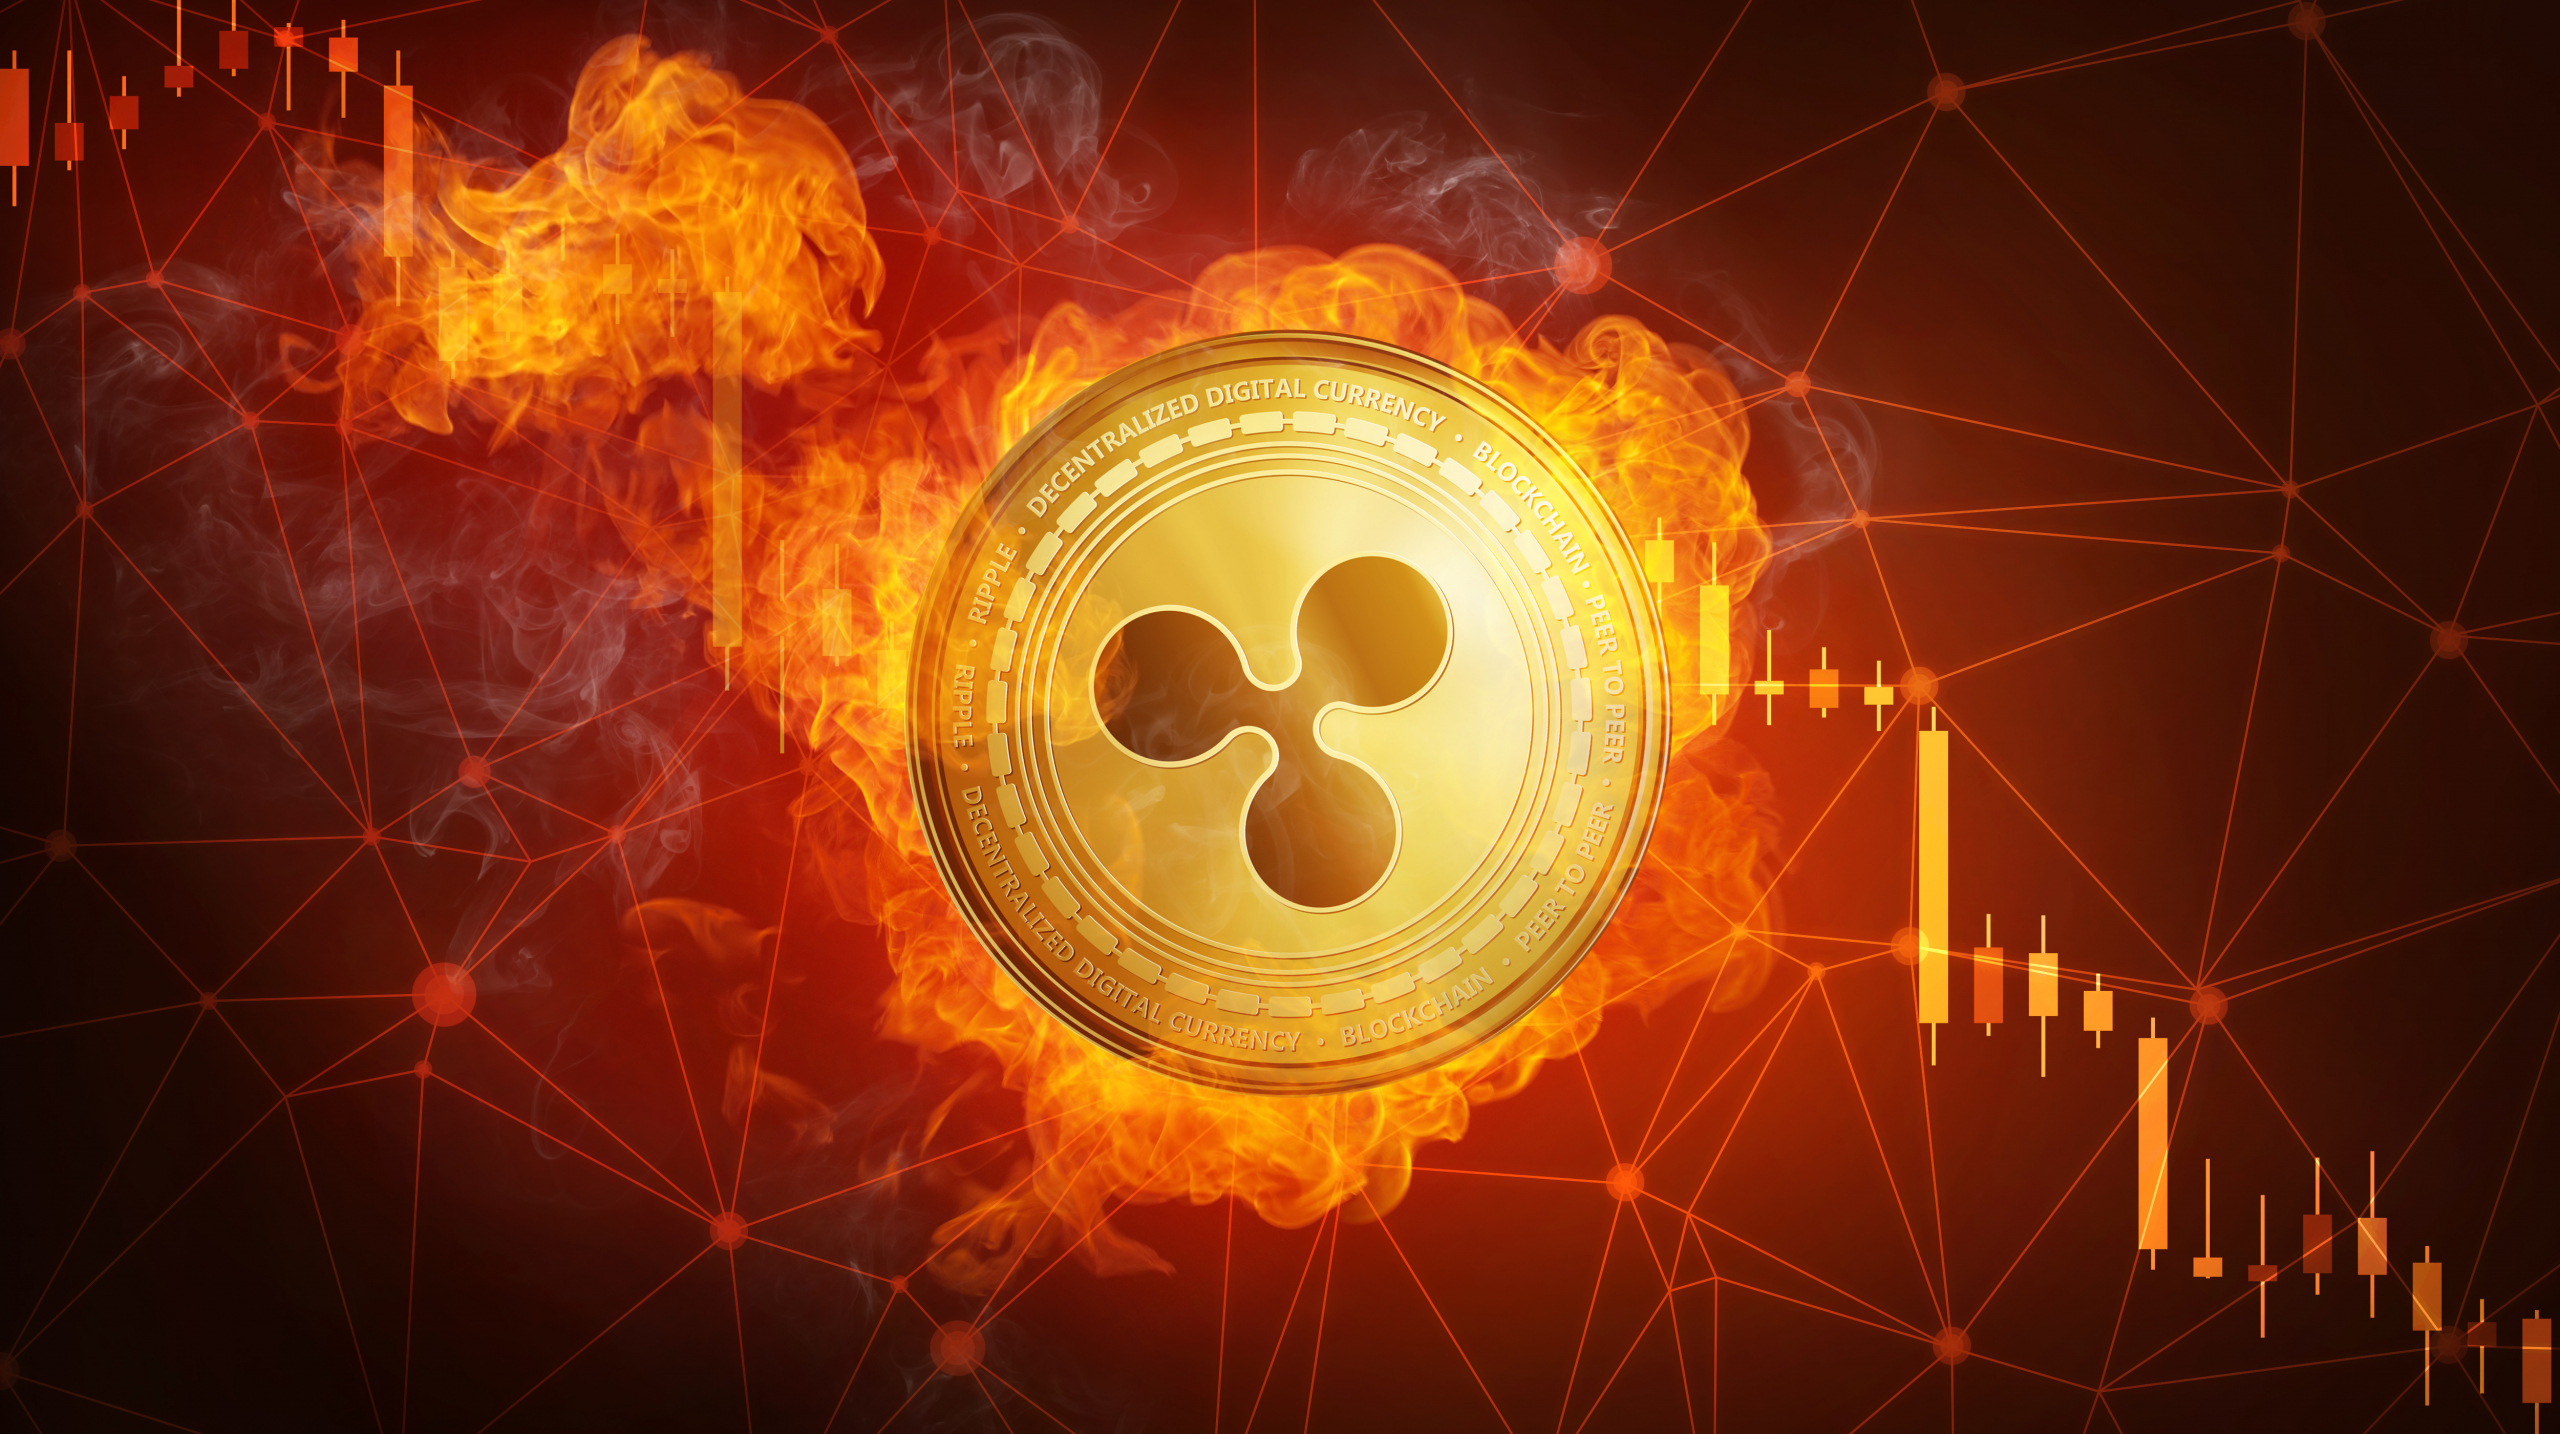 Will the Ripple price fall further?
